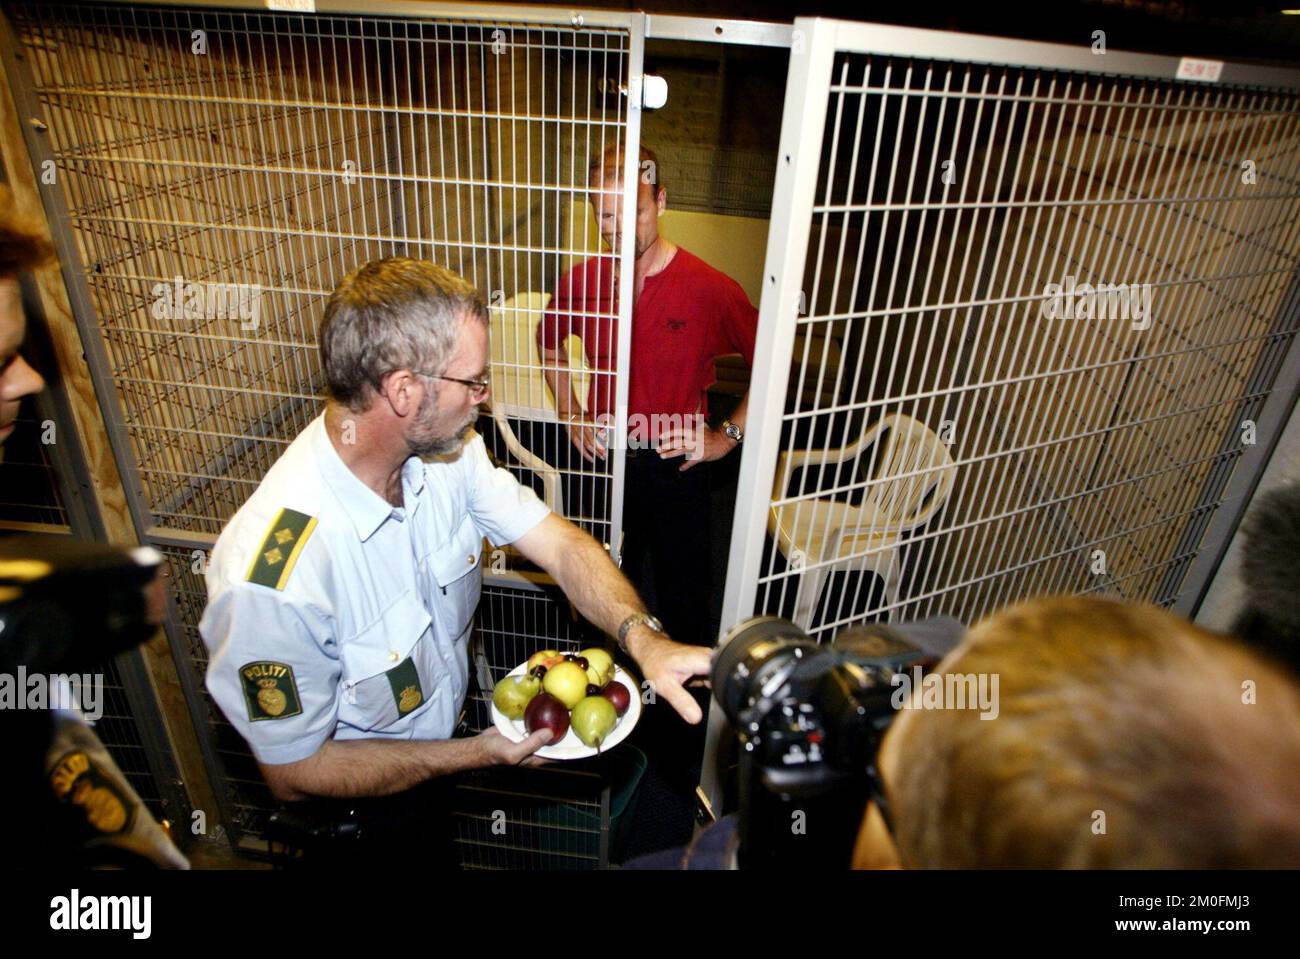 PA PHOTOS / POLFOTO - UK USE ONLY: The Danish EU presidency started July 1. The Danish authorities are preparing for the large number of meetings and demonstrations that will take place in Denmark. The Copenhagen Police presented their cages or 'waiting rooms' for arrested demonstrators. Minister for European Affairs Bertel Haarder Tuesday stated though that the meetings will be de-dramatized. PHOTO SHOWS: a policeman serves fruit (!) for a demonstrator (MODEL) in one of the small cages for detained demonstrators. *** DENMARK OUT *** Photo:  Ole Buntzen/POLFOTO-far Stock Photo